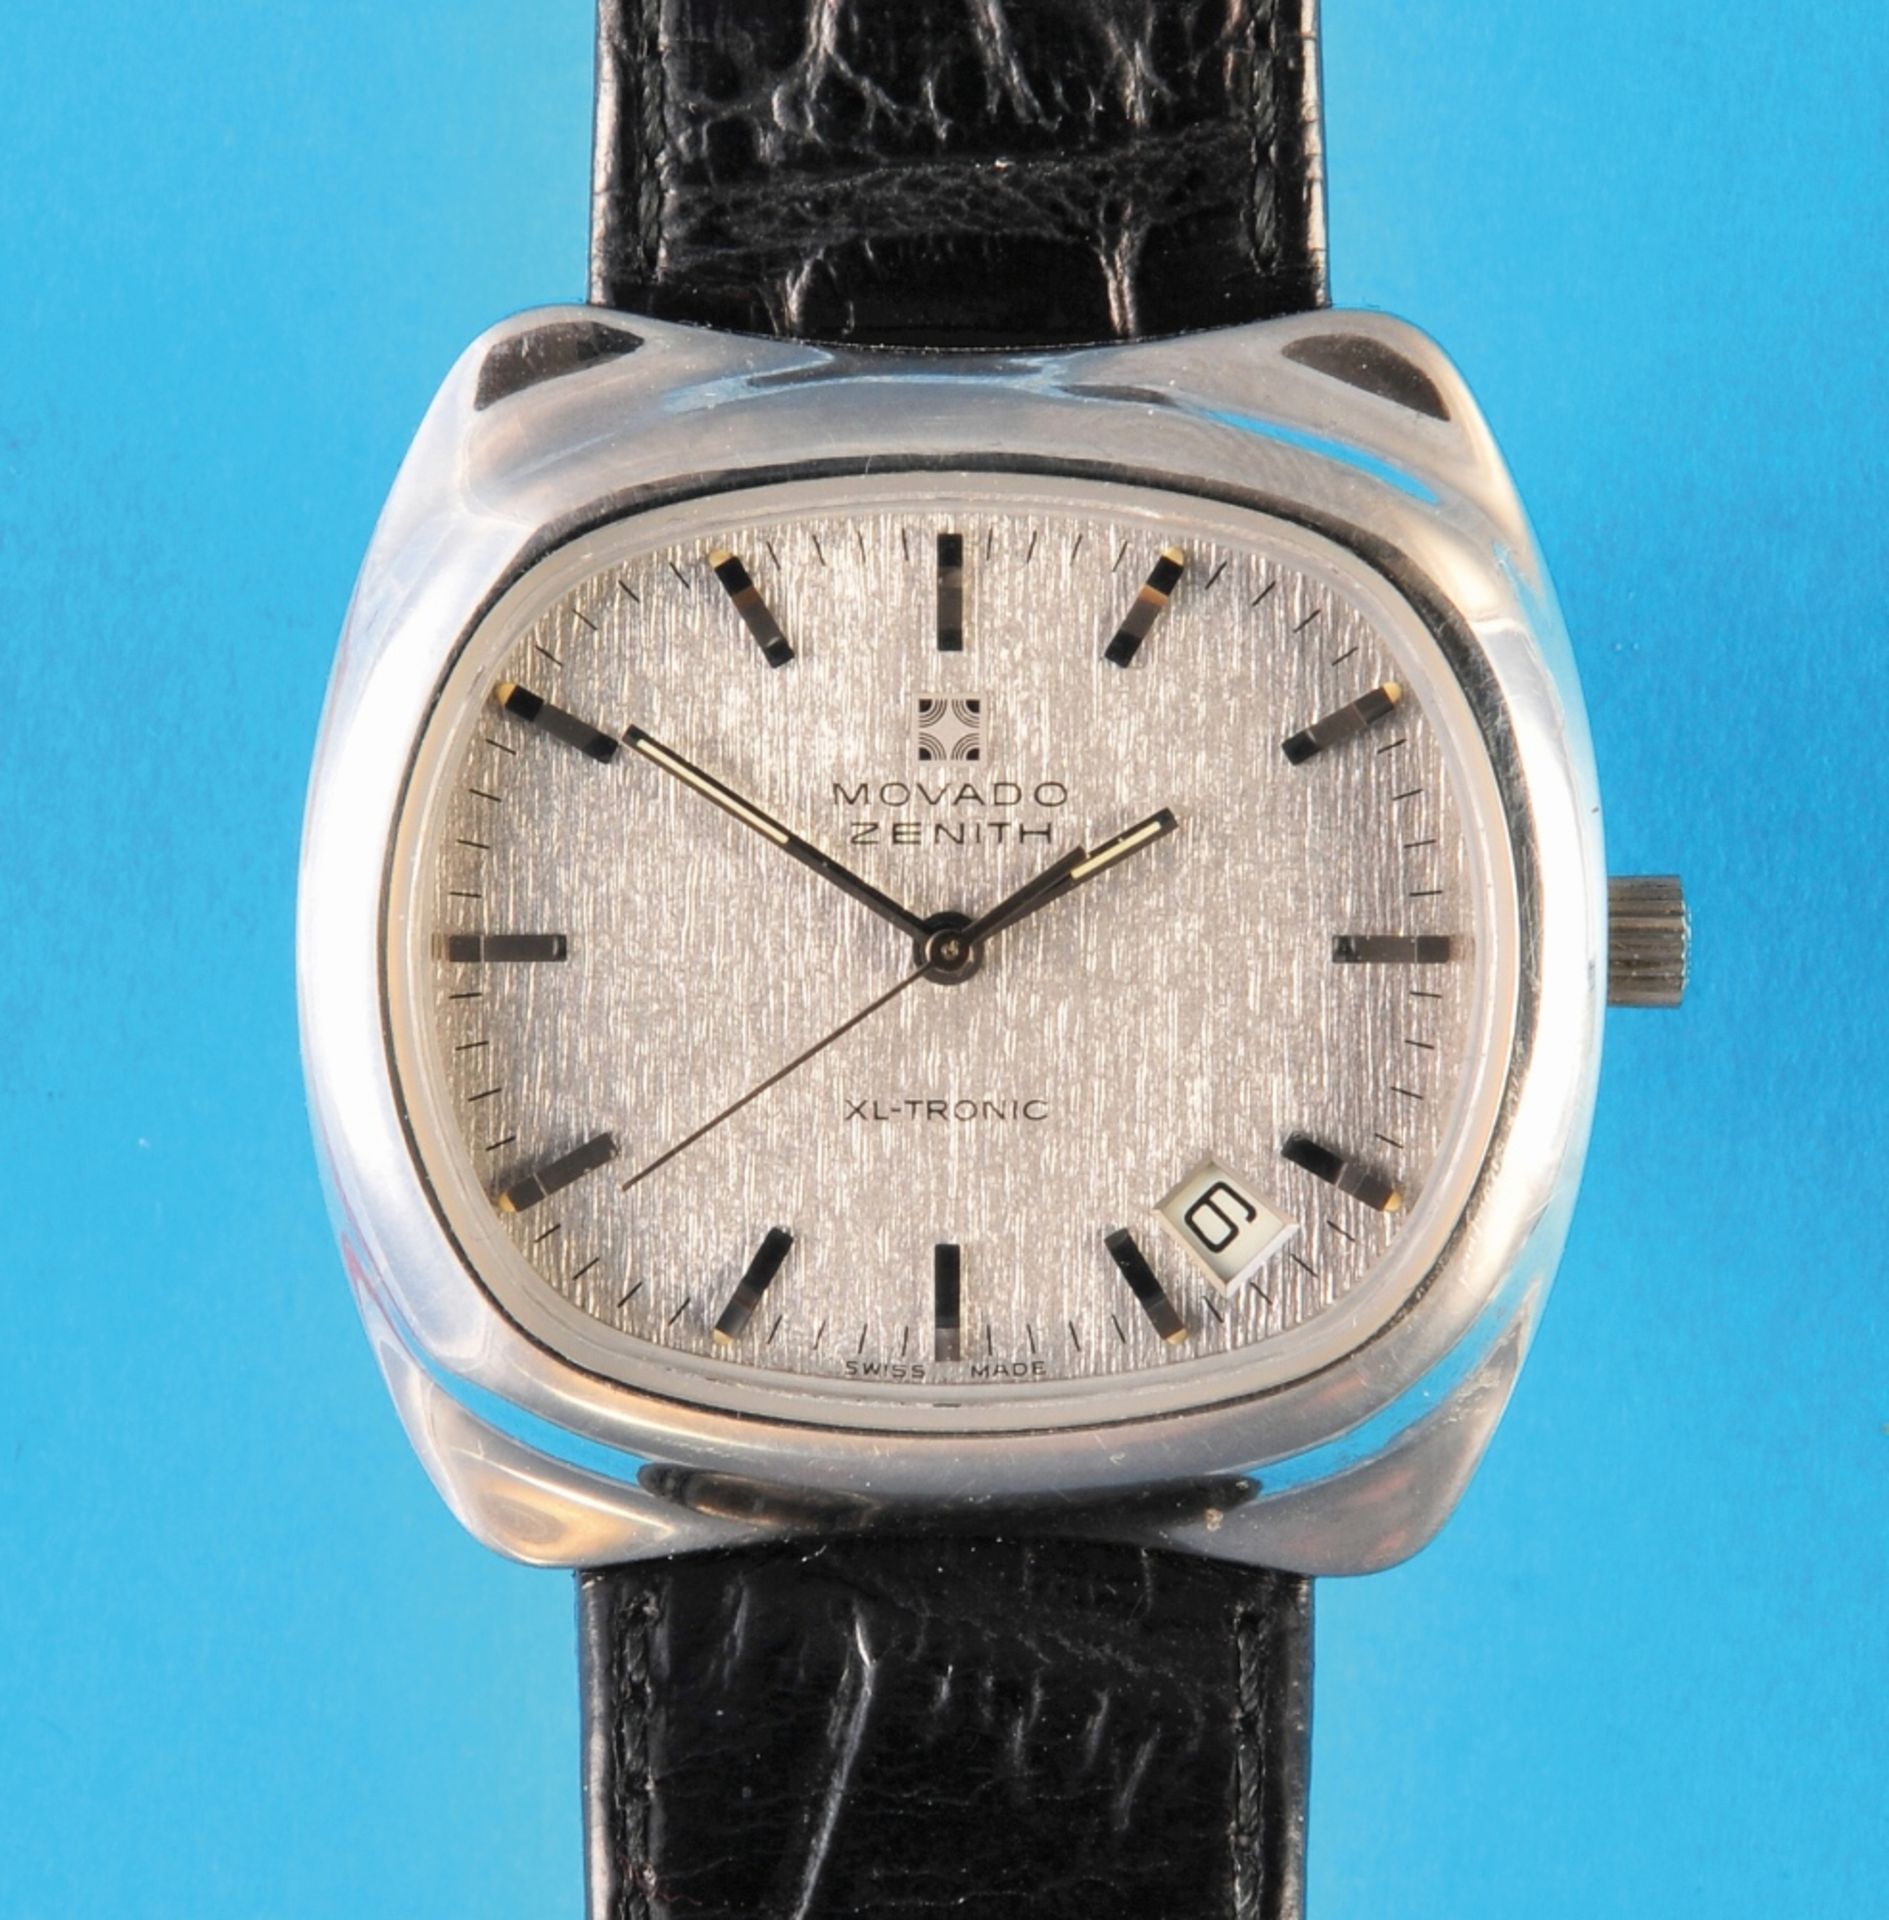 Movado Zenith "XL-Tronic" wristwatch with central second and date, reference 01-0030-500, cal. Zenit